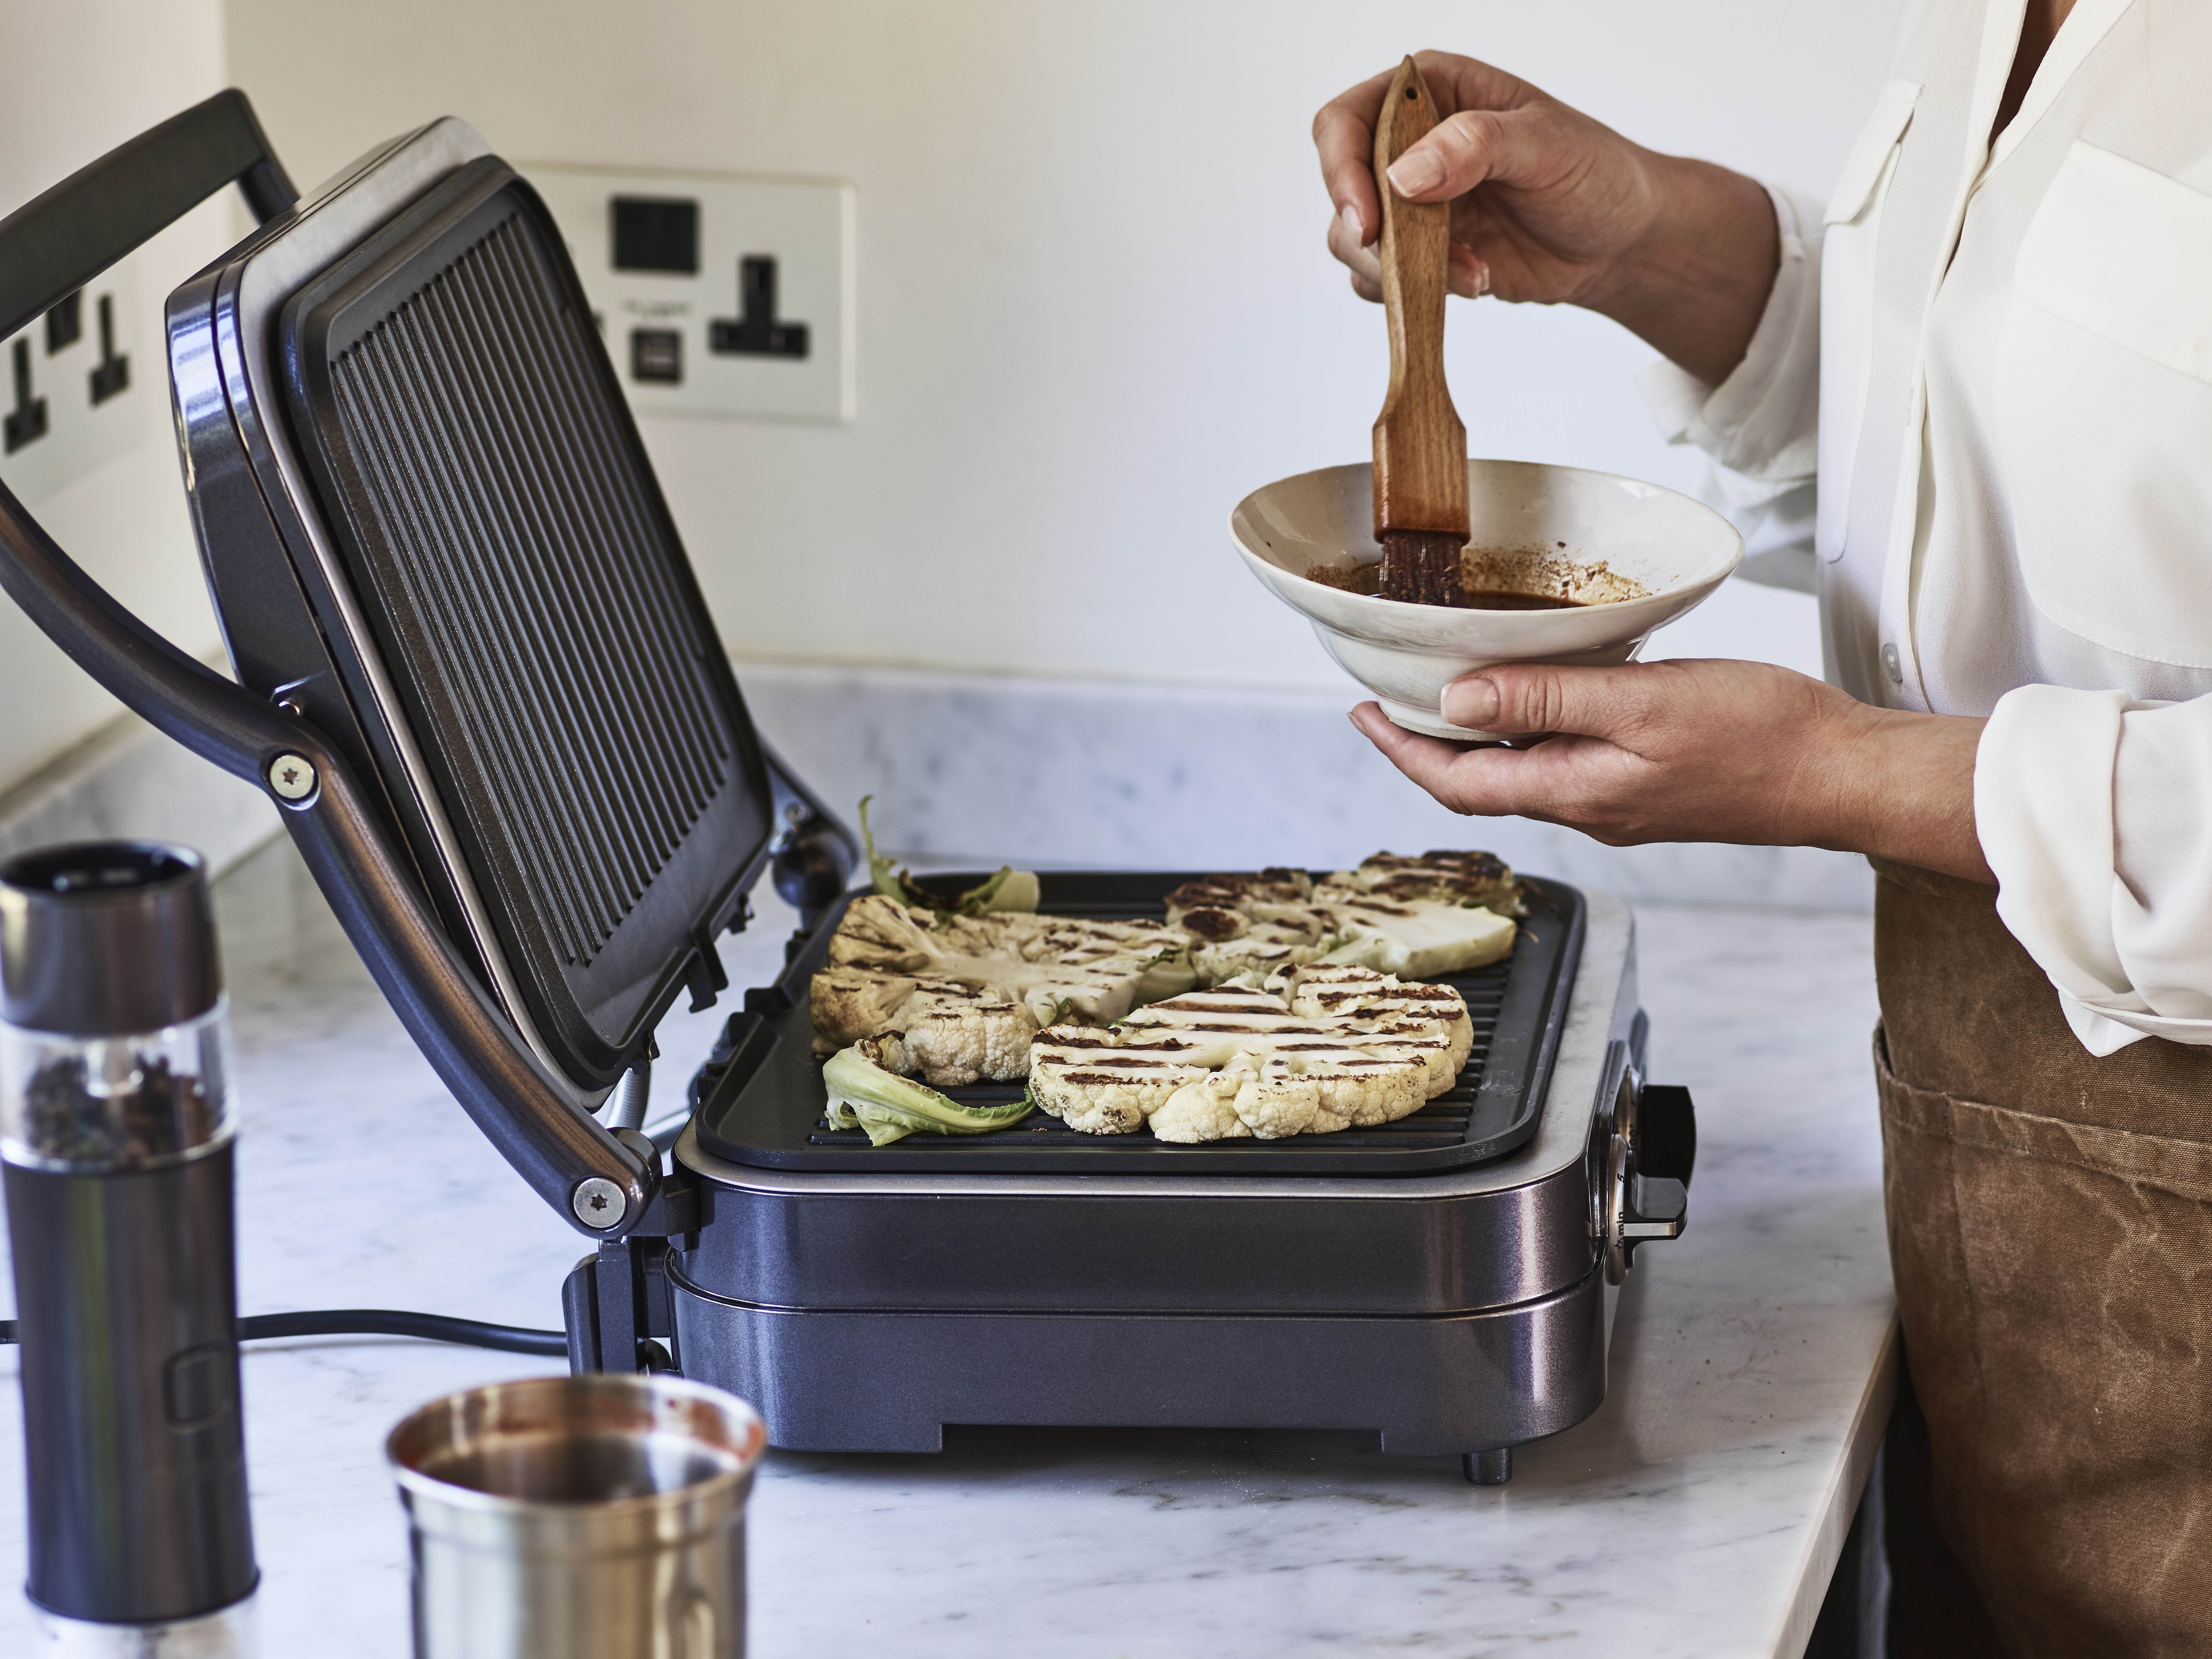 https://static.independent.co.uk/2021/02/04/14/Cuisinart%20Griddle%20%20Grill%20120%20%282%29.jpg